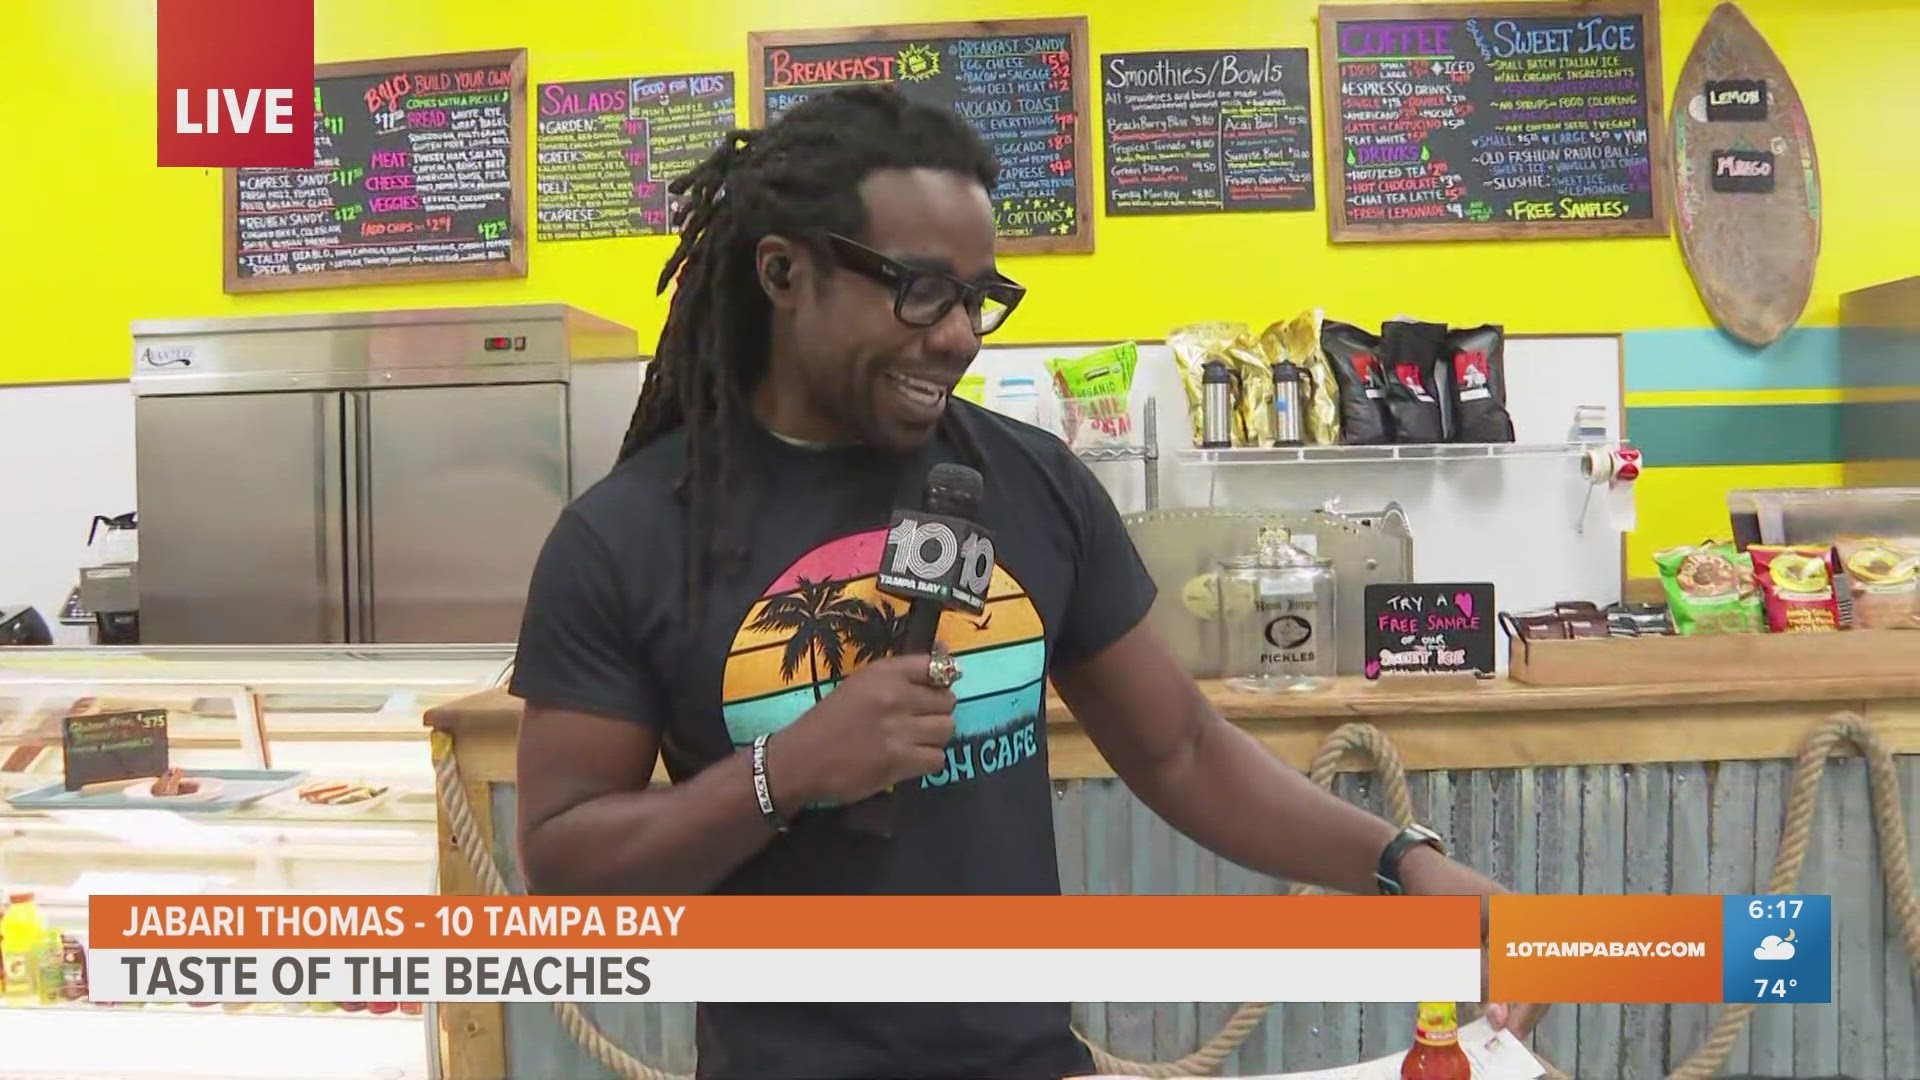 Jabari Thomas talks about the coming Taste of the Beaches and what special dishes and deals will be offered.